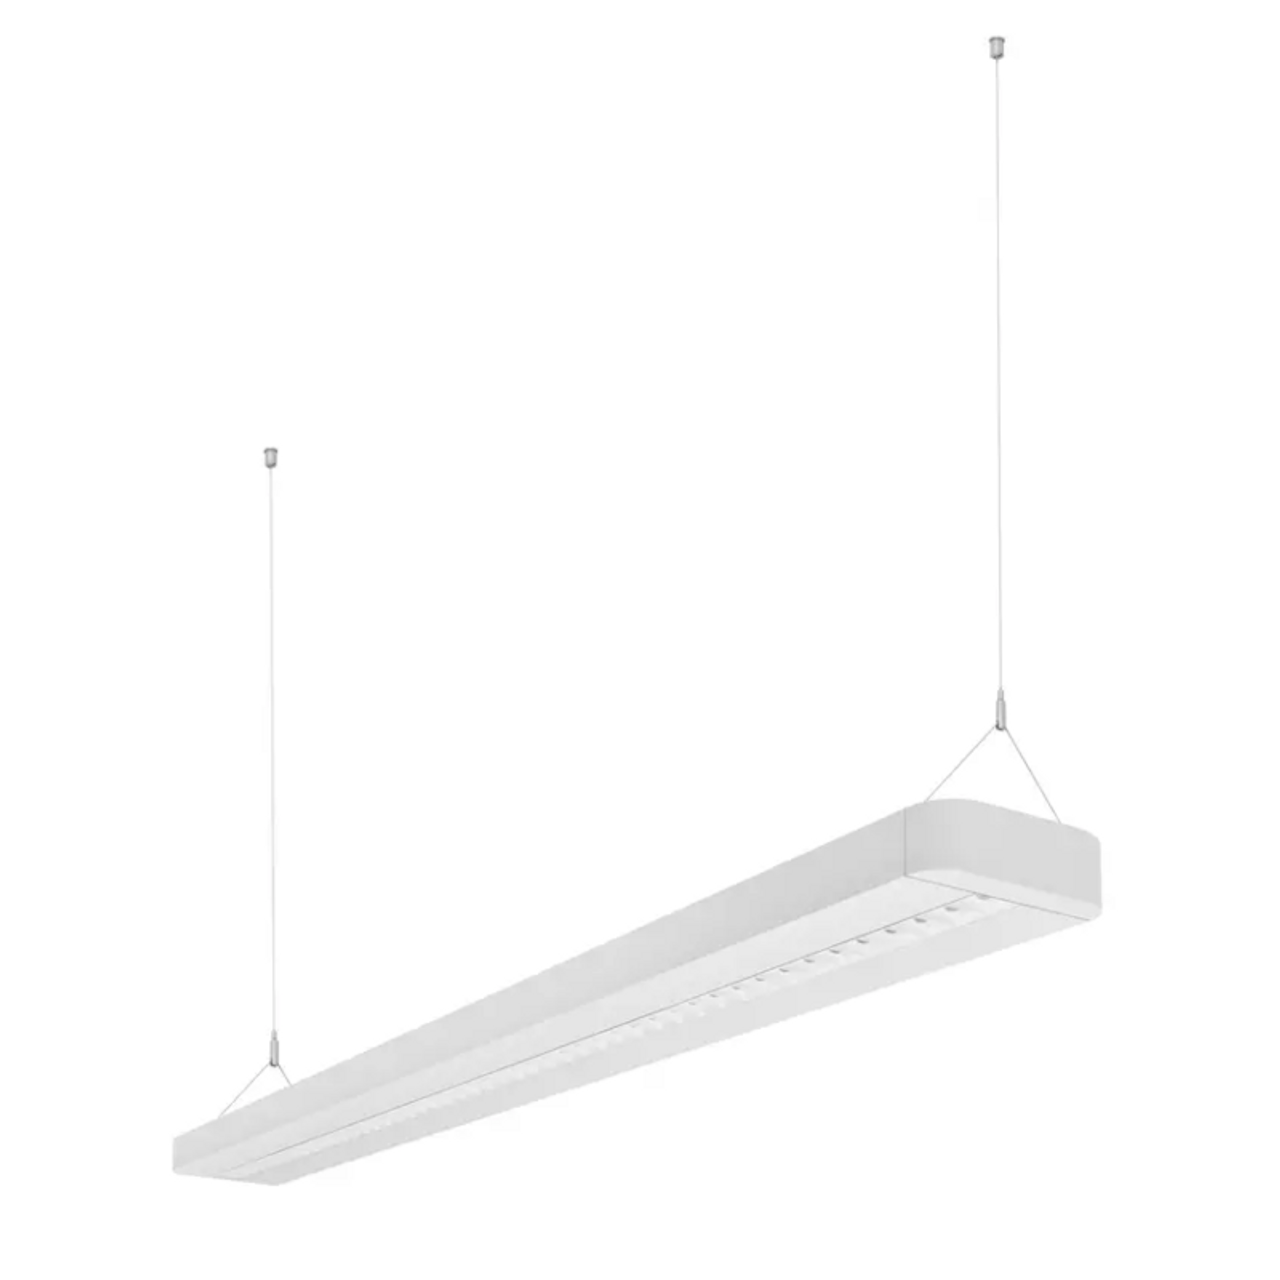 LED Linear Indiviled Direct/Indirect 1200mm 42W 4650lm 3000K White Emergency